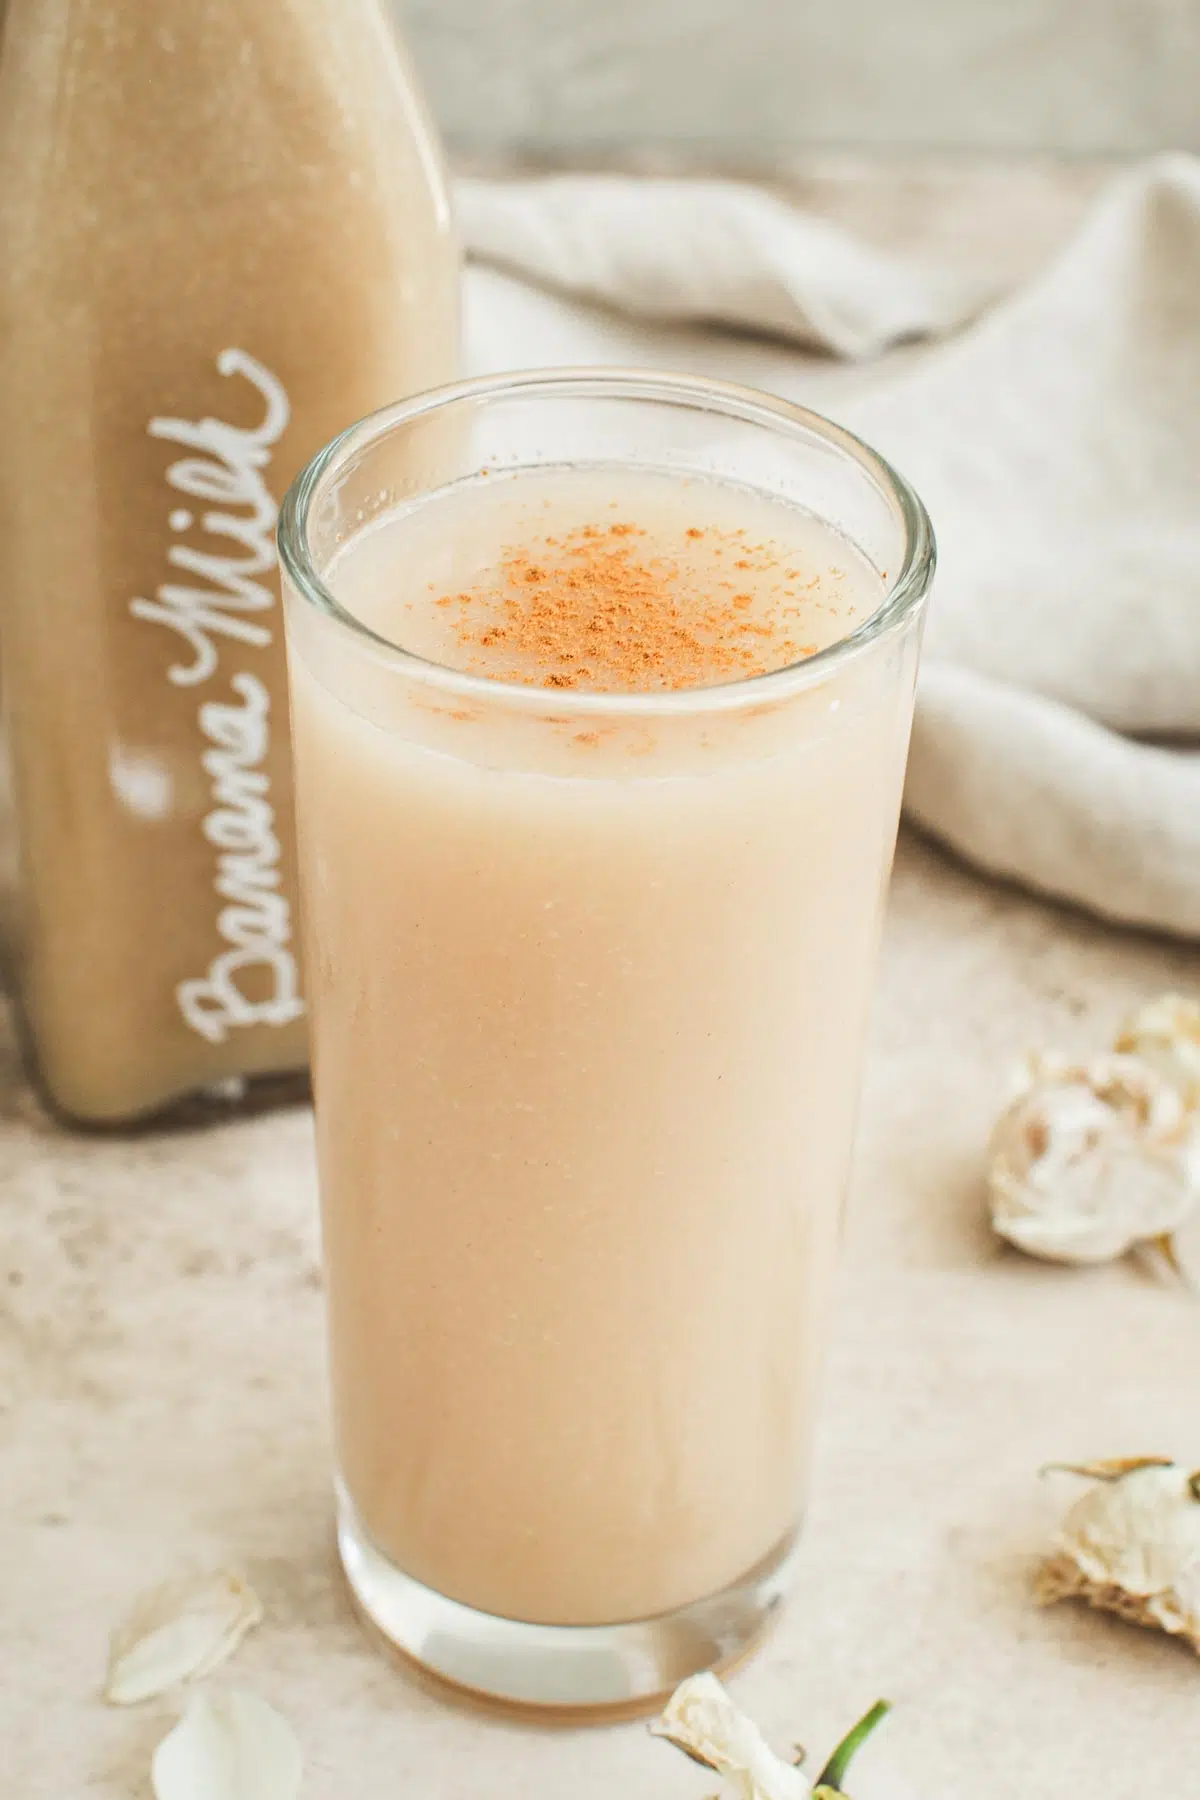 Banana milk in a glass topped with cinnamon.